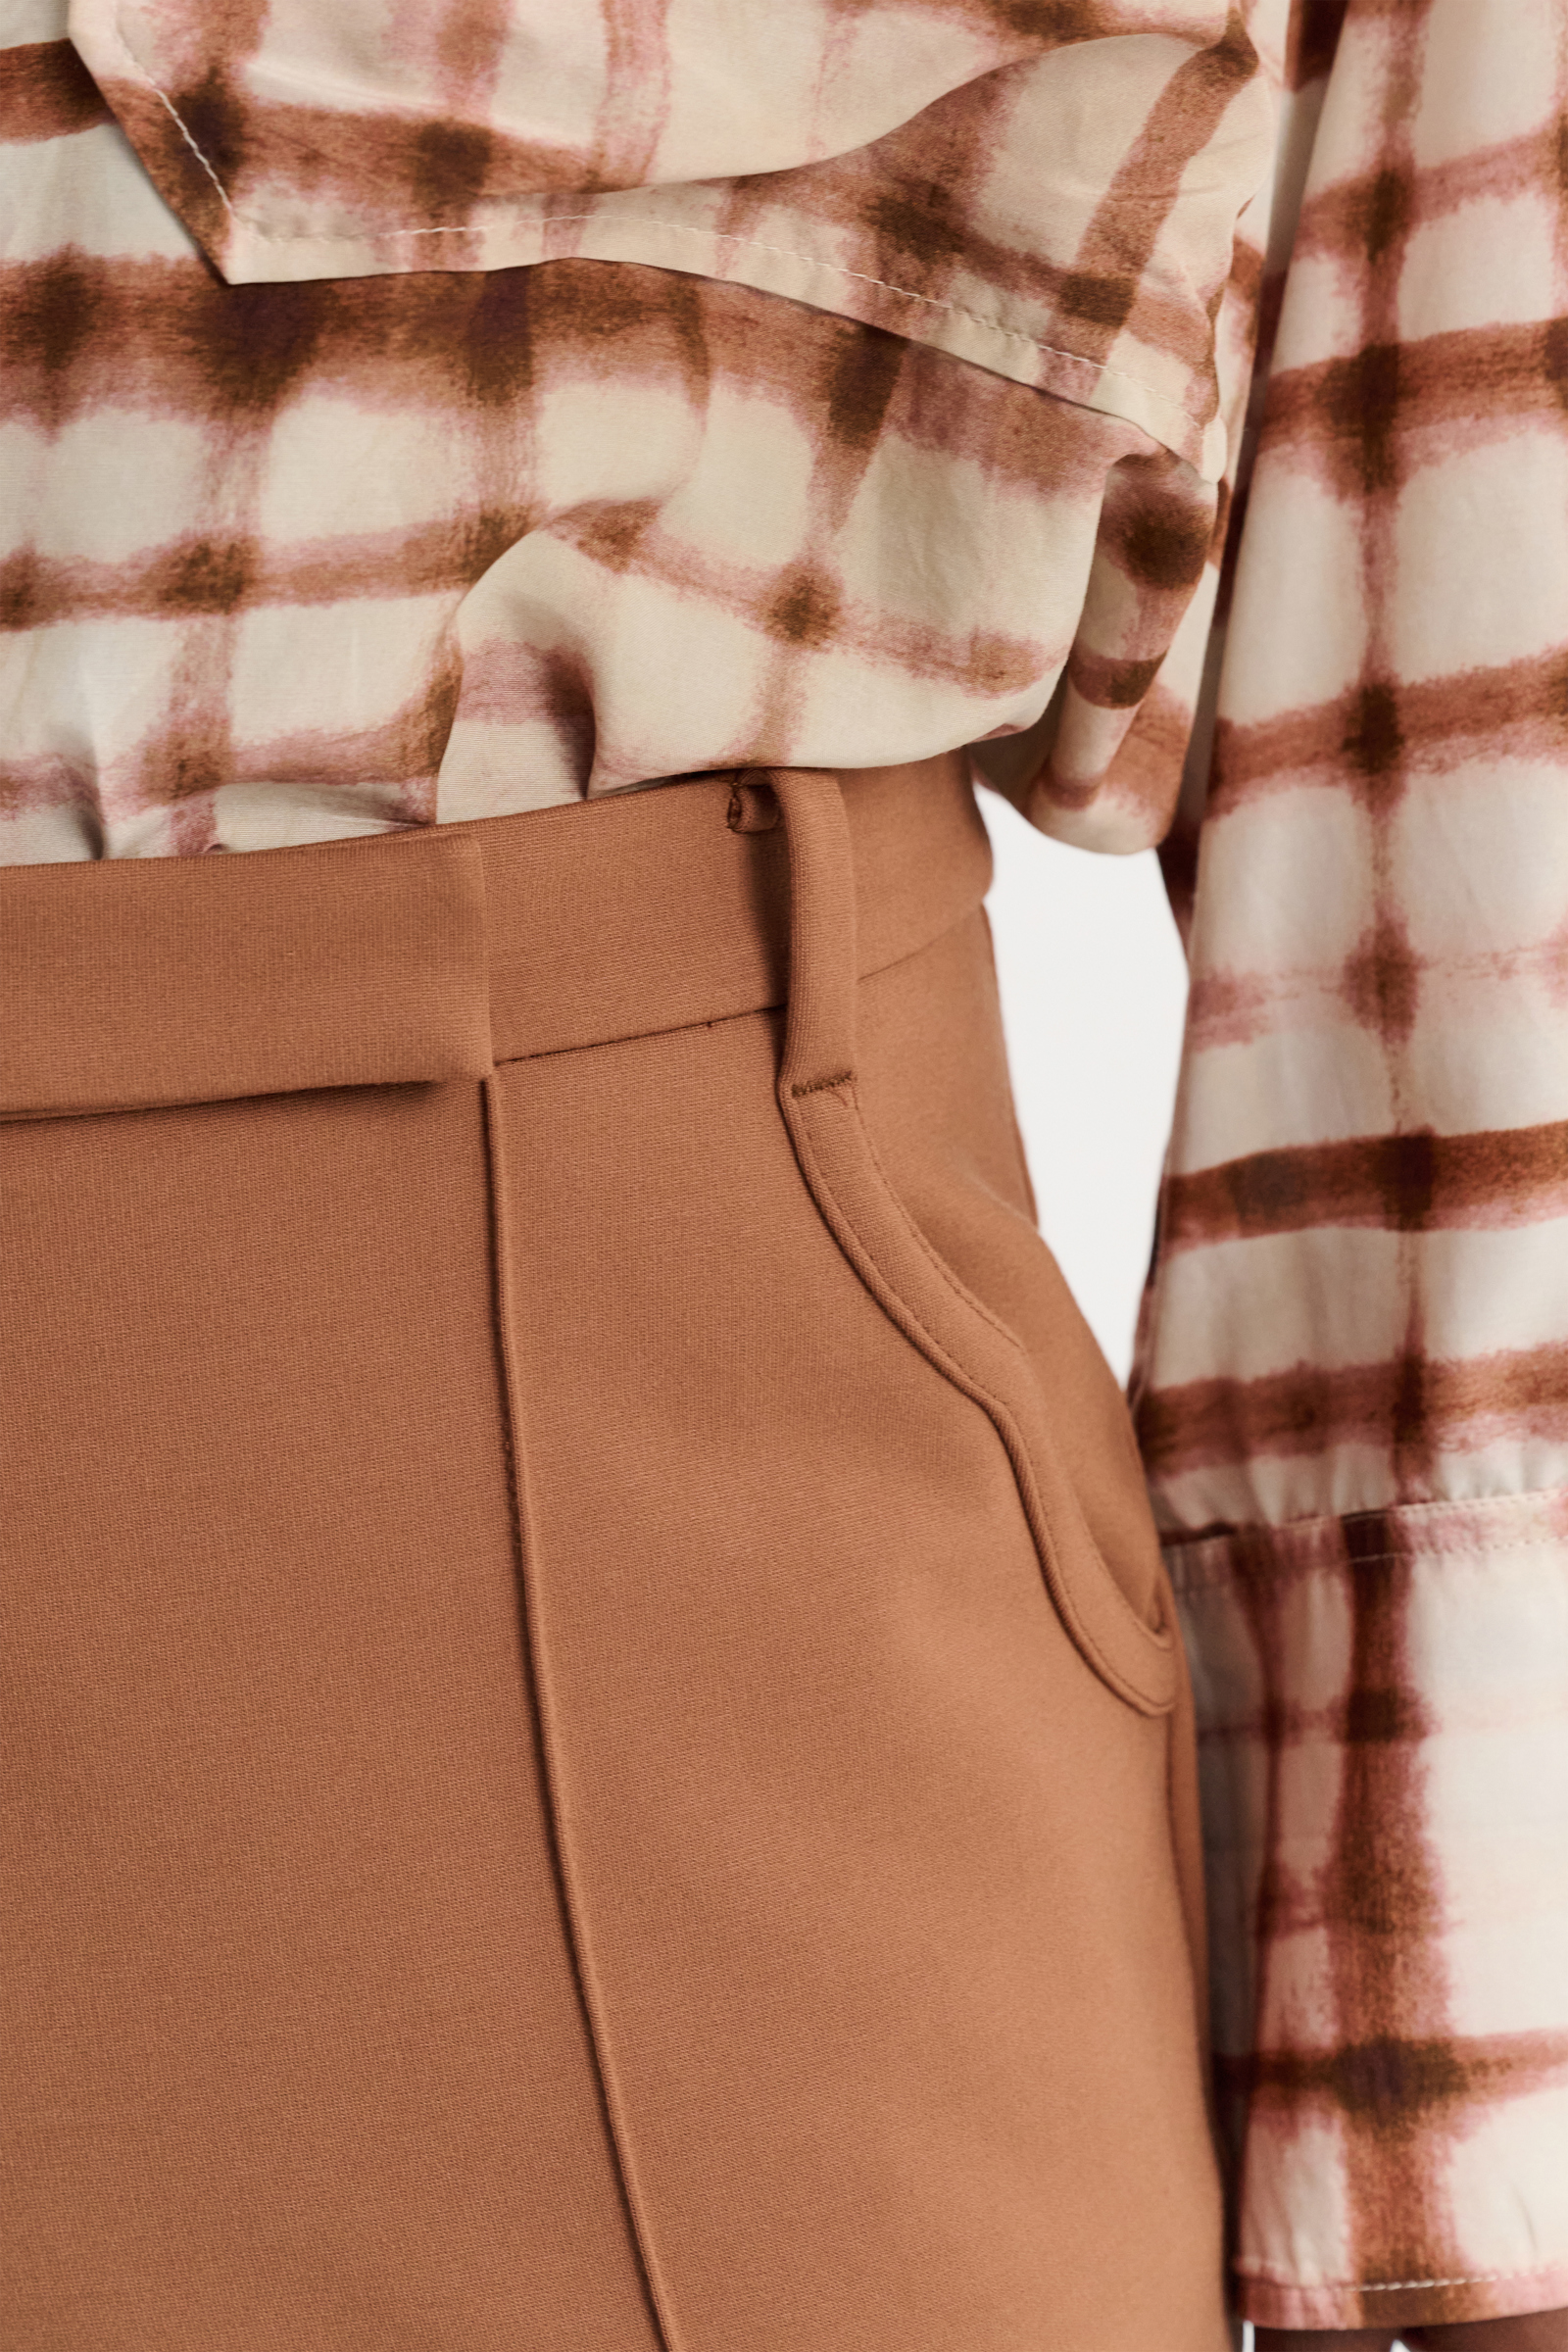 Dorothee Schumacher Cropped flared pants in Punto Milano with Western details brown